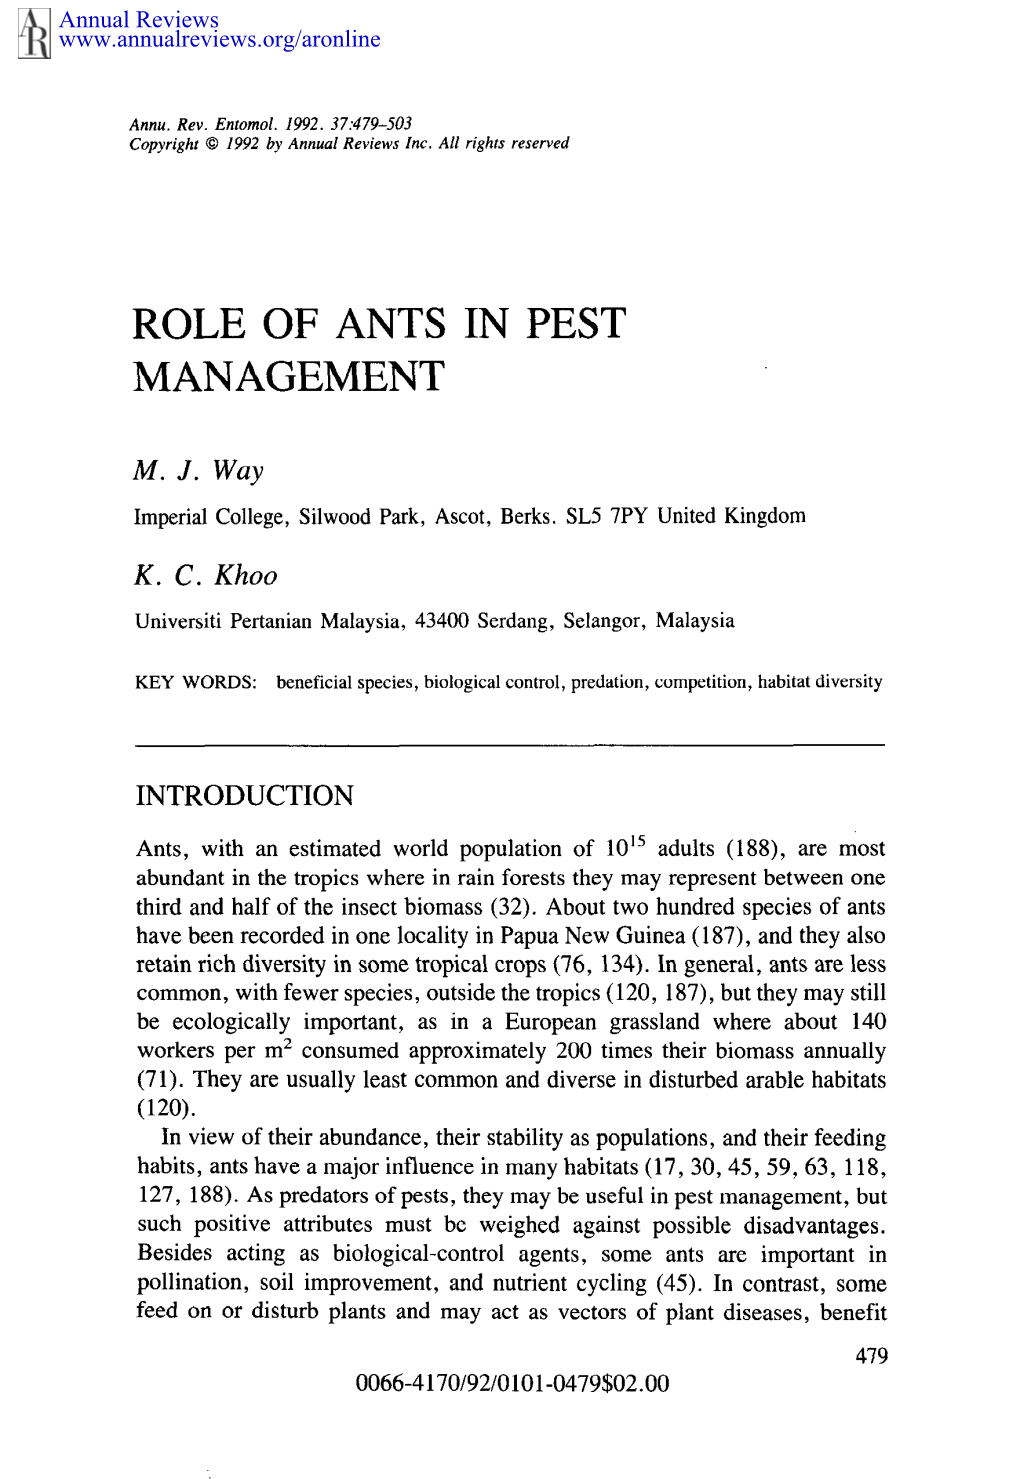 Role of Ants in Pest Management